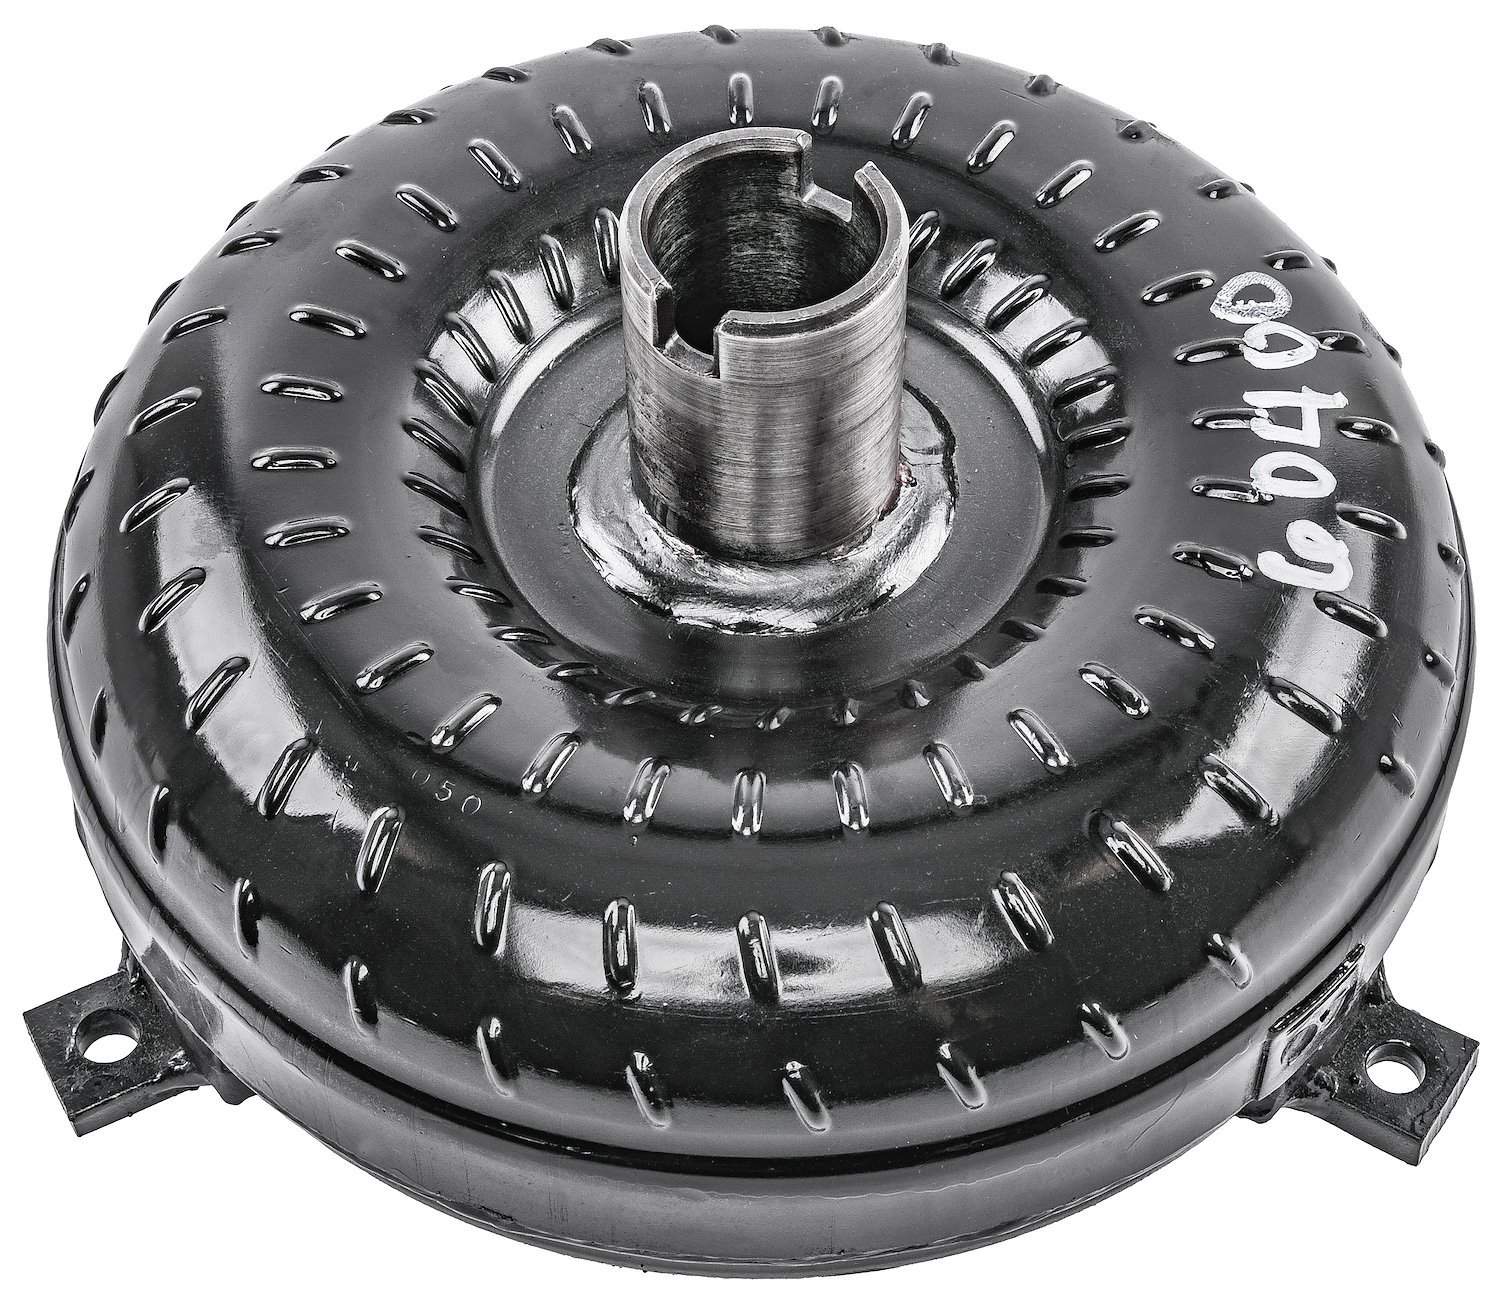 Torque Converter for GM TH350/TH400 [2300-2700 RPM Stall Speed]